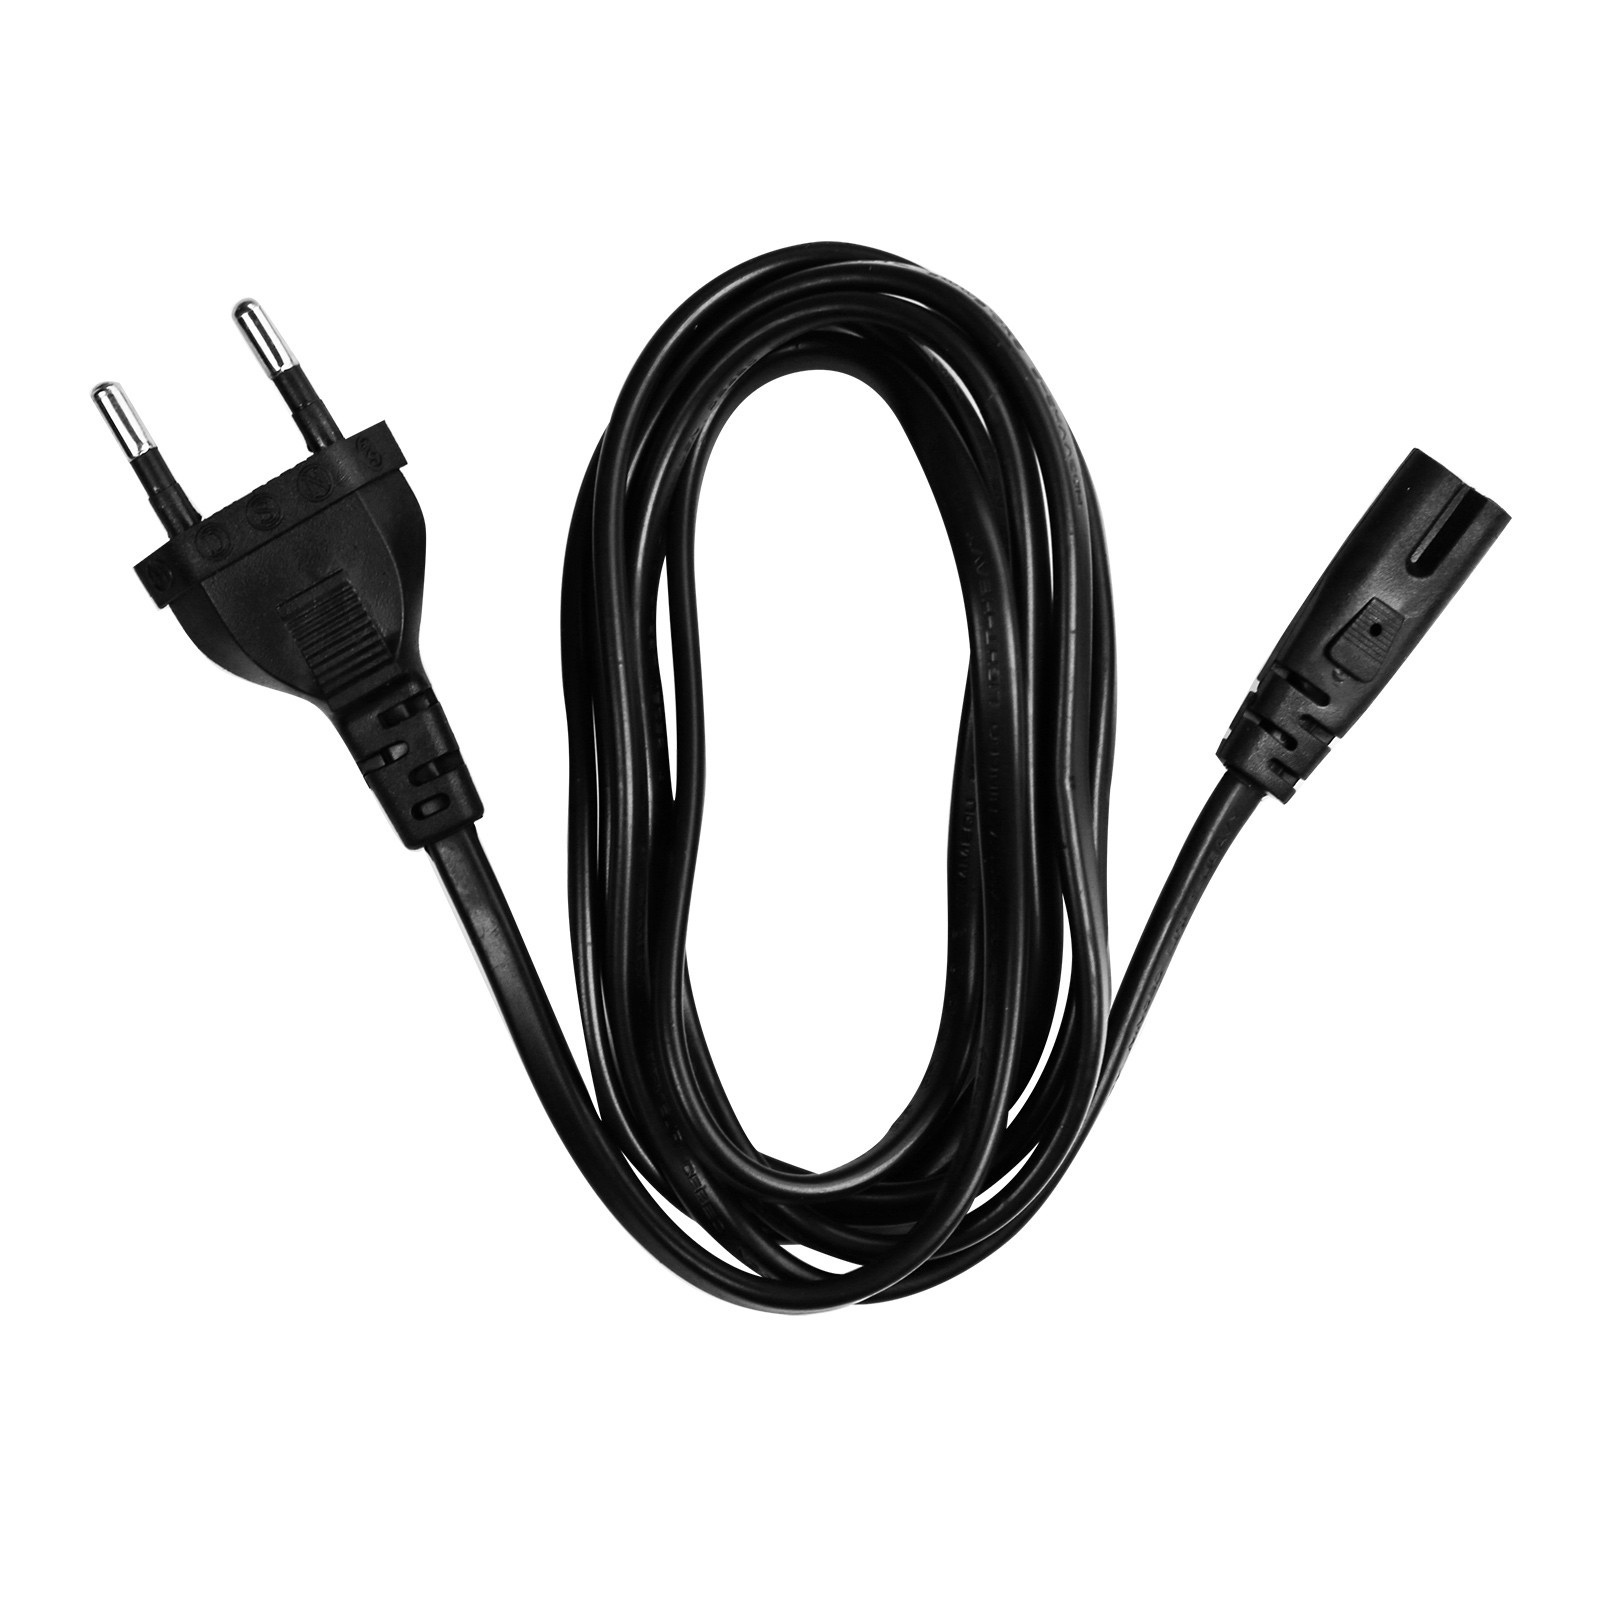 EKON HDMI V1.4 cable male to male high speed with ethernet. OD 6.0mm. Conductor pure copper,30 AWG, jacket black color. Connector PVC black  color and nickel plated. Shielding: Al-foil with al-mg. Total Lenght 1,8 mt